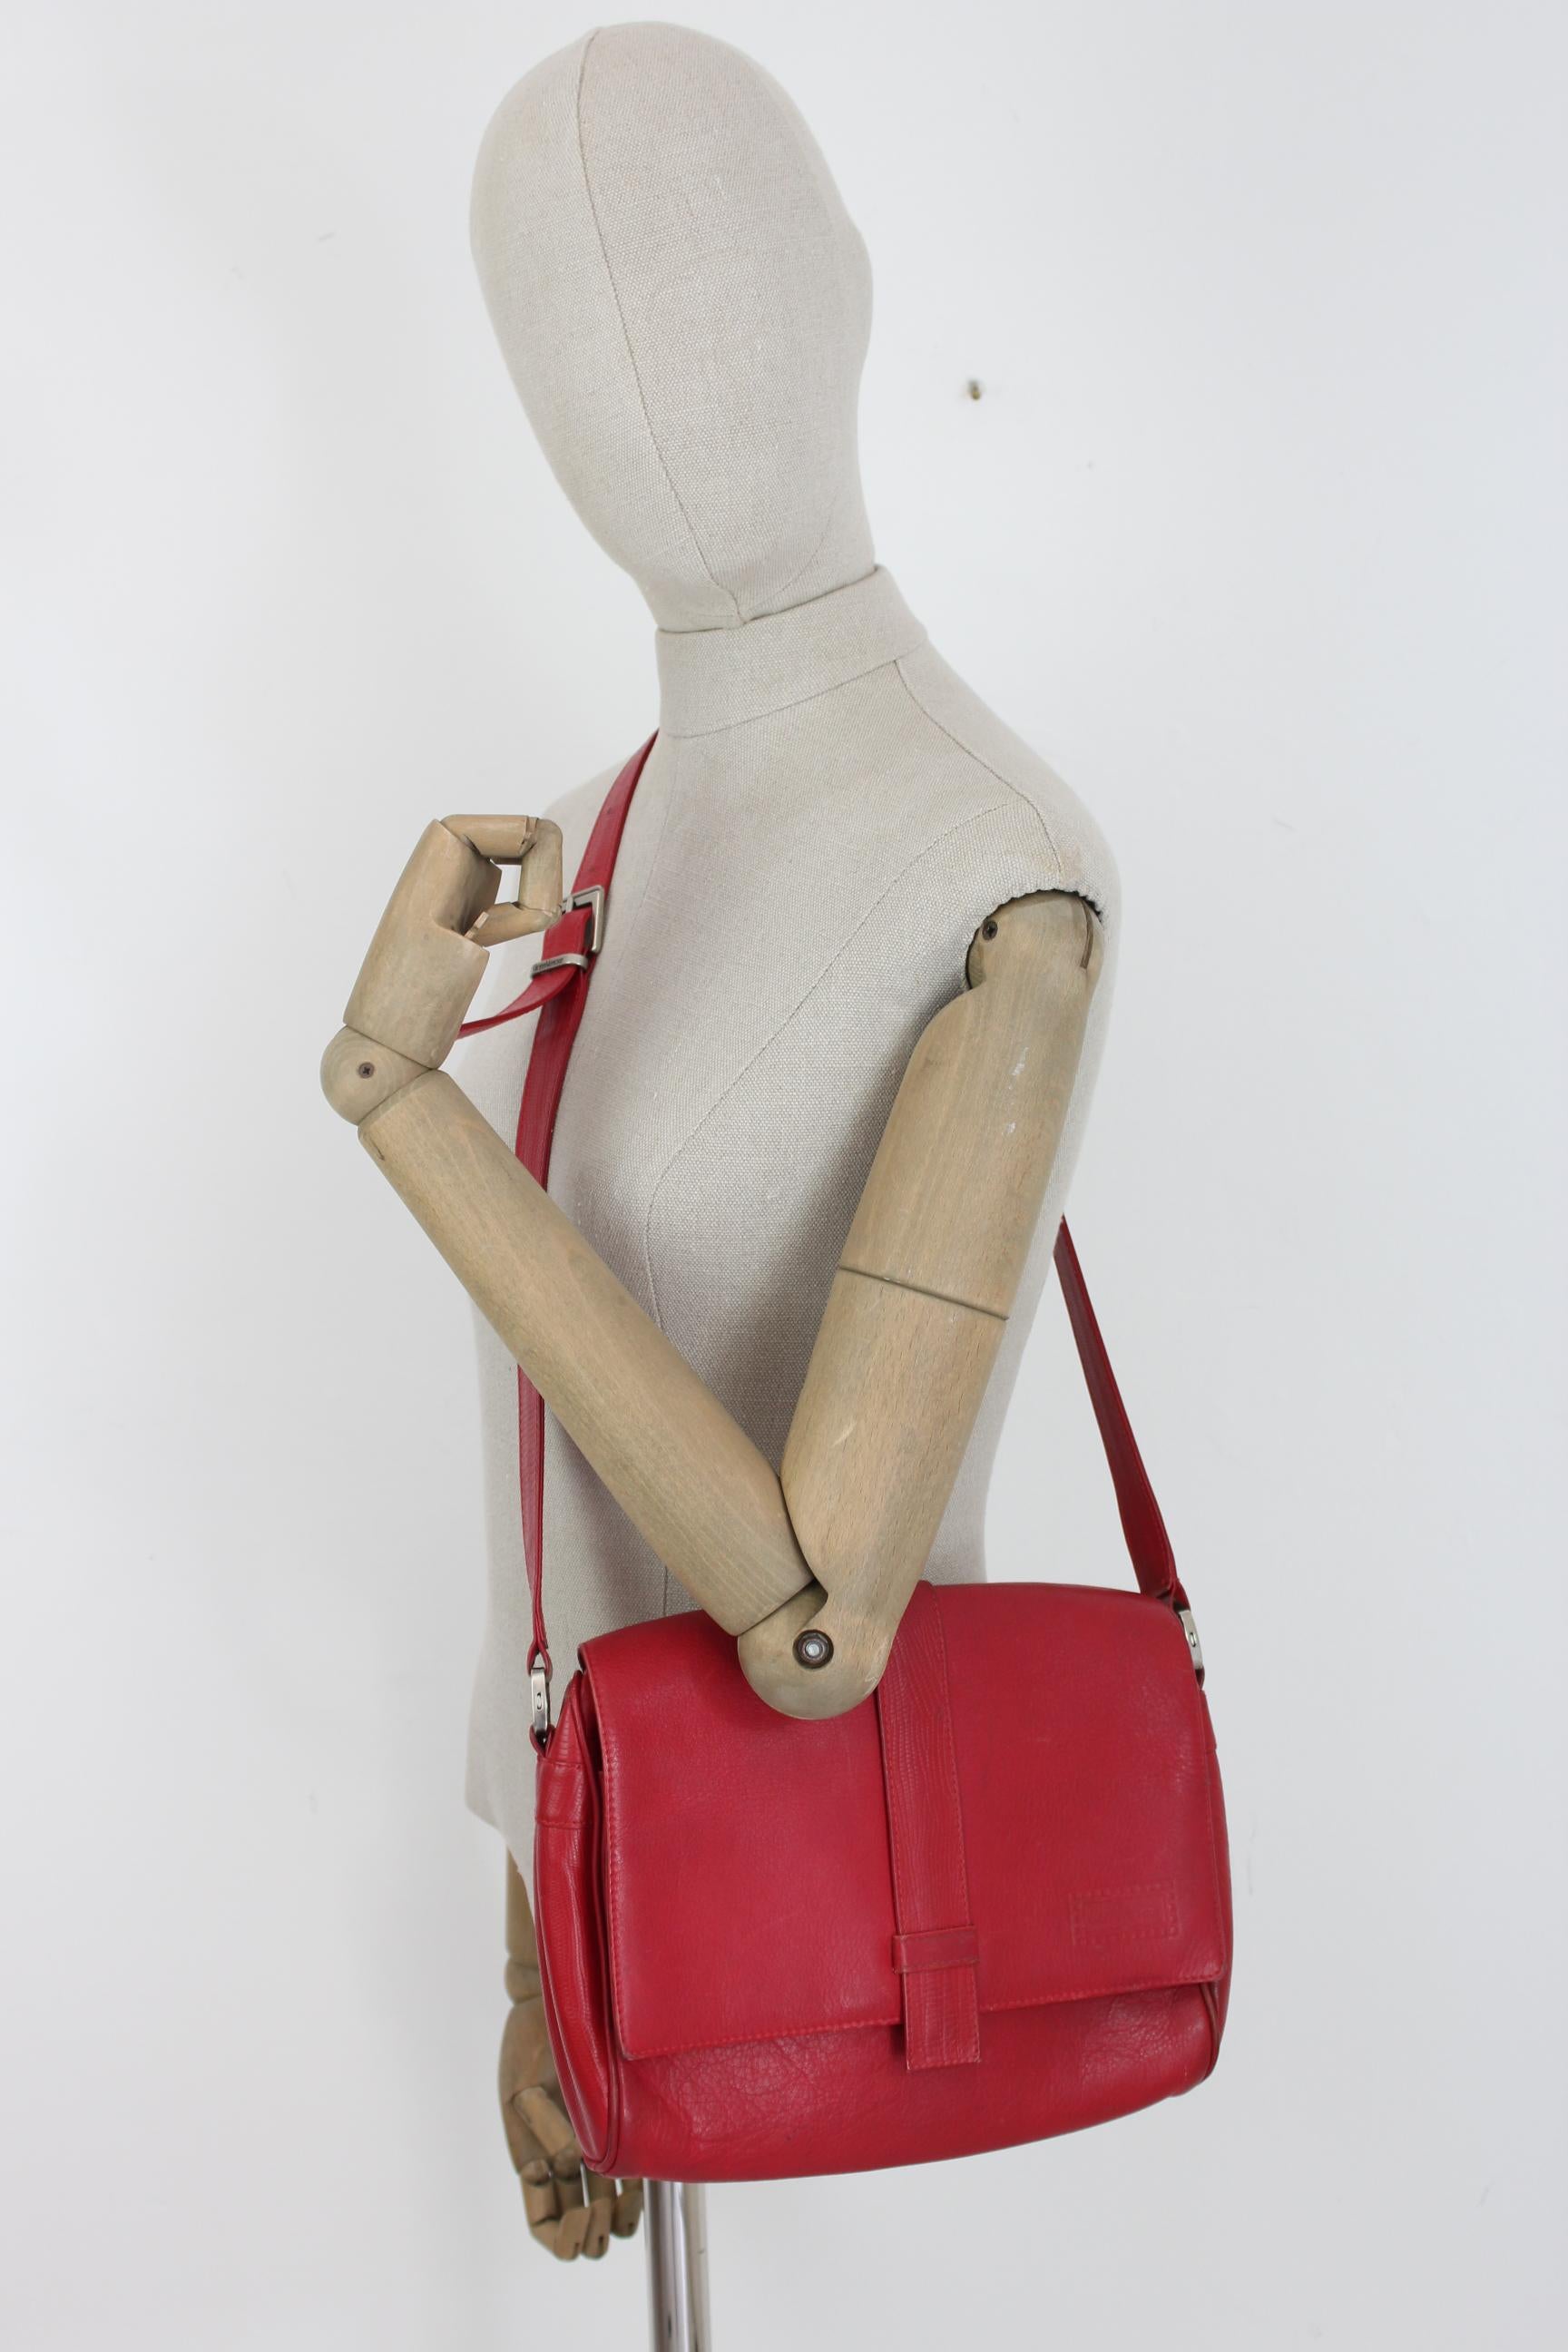 Gianni Versace vintage 80s shoulder bag. Soft model, closure with clip button and zip. 100% leather python effect, red color. Adjustable shoulder strap, pockets with internal dividers. Silver details. Made in Italy. Good vintage conditions, some